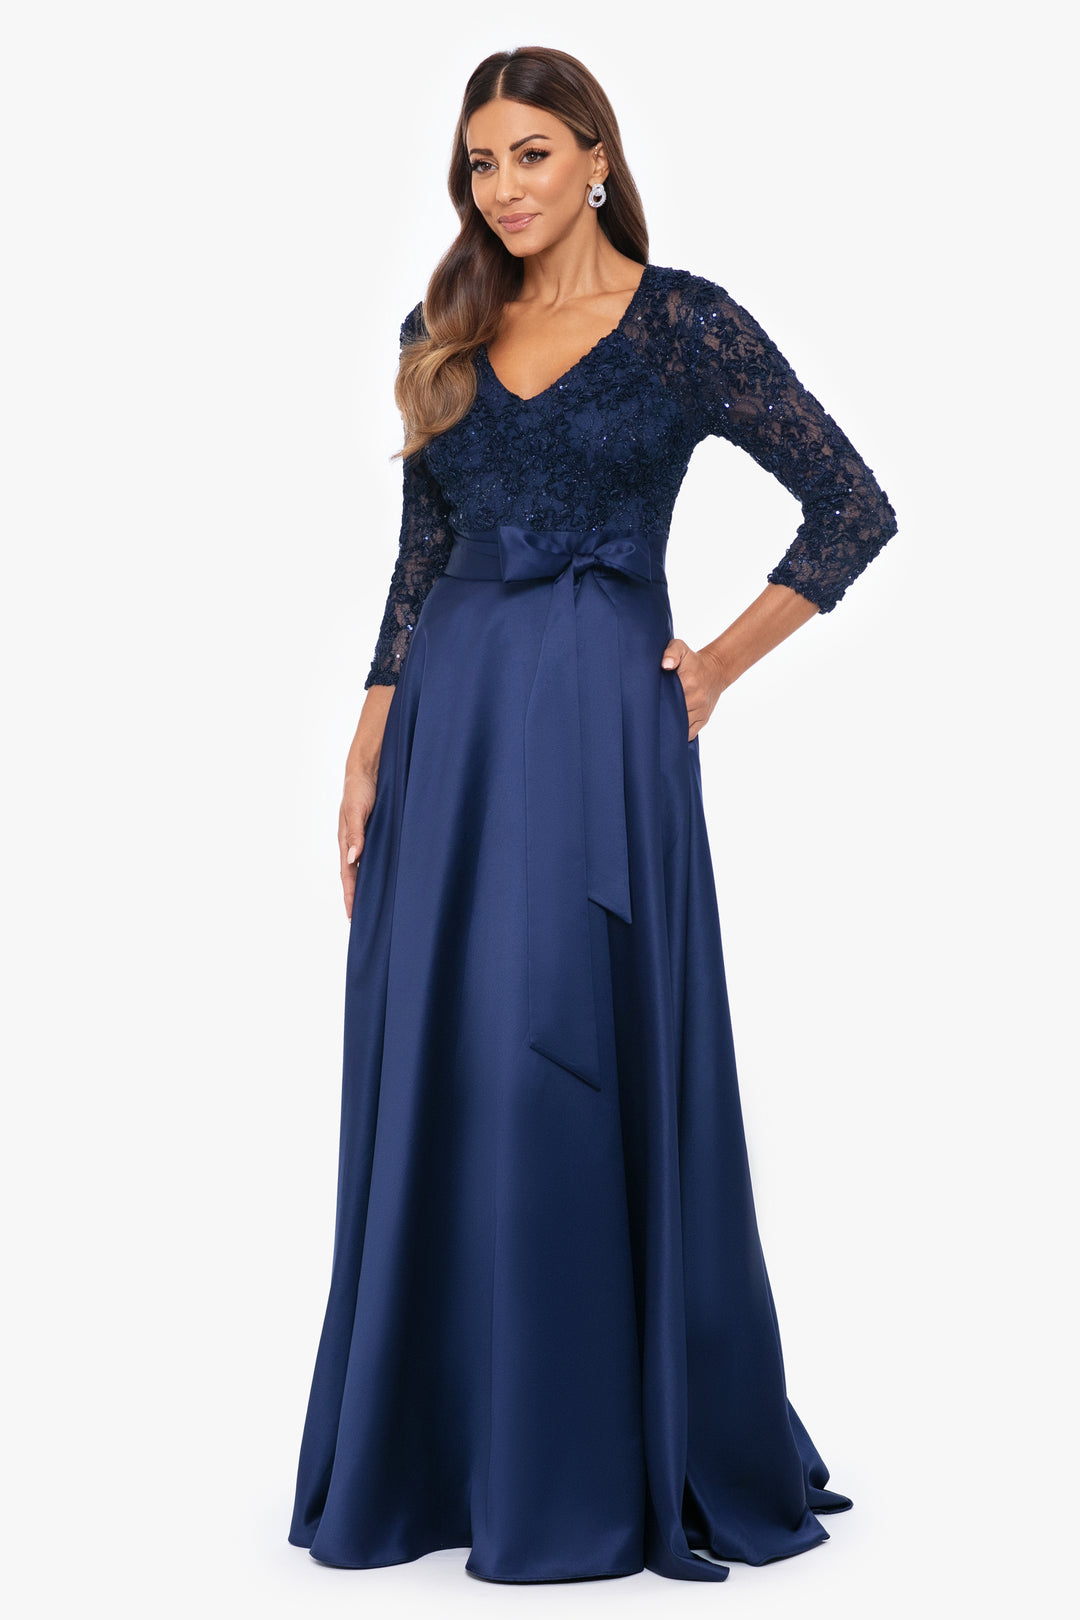 "Cordelia" Long Lace and Satin 3/4 Sleeve Ball Gown